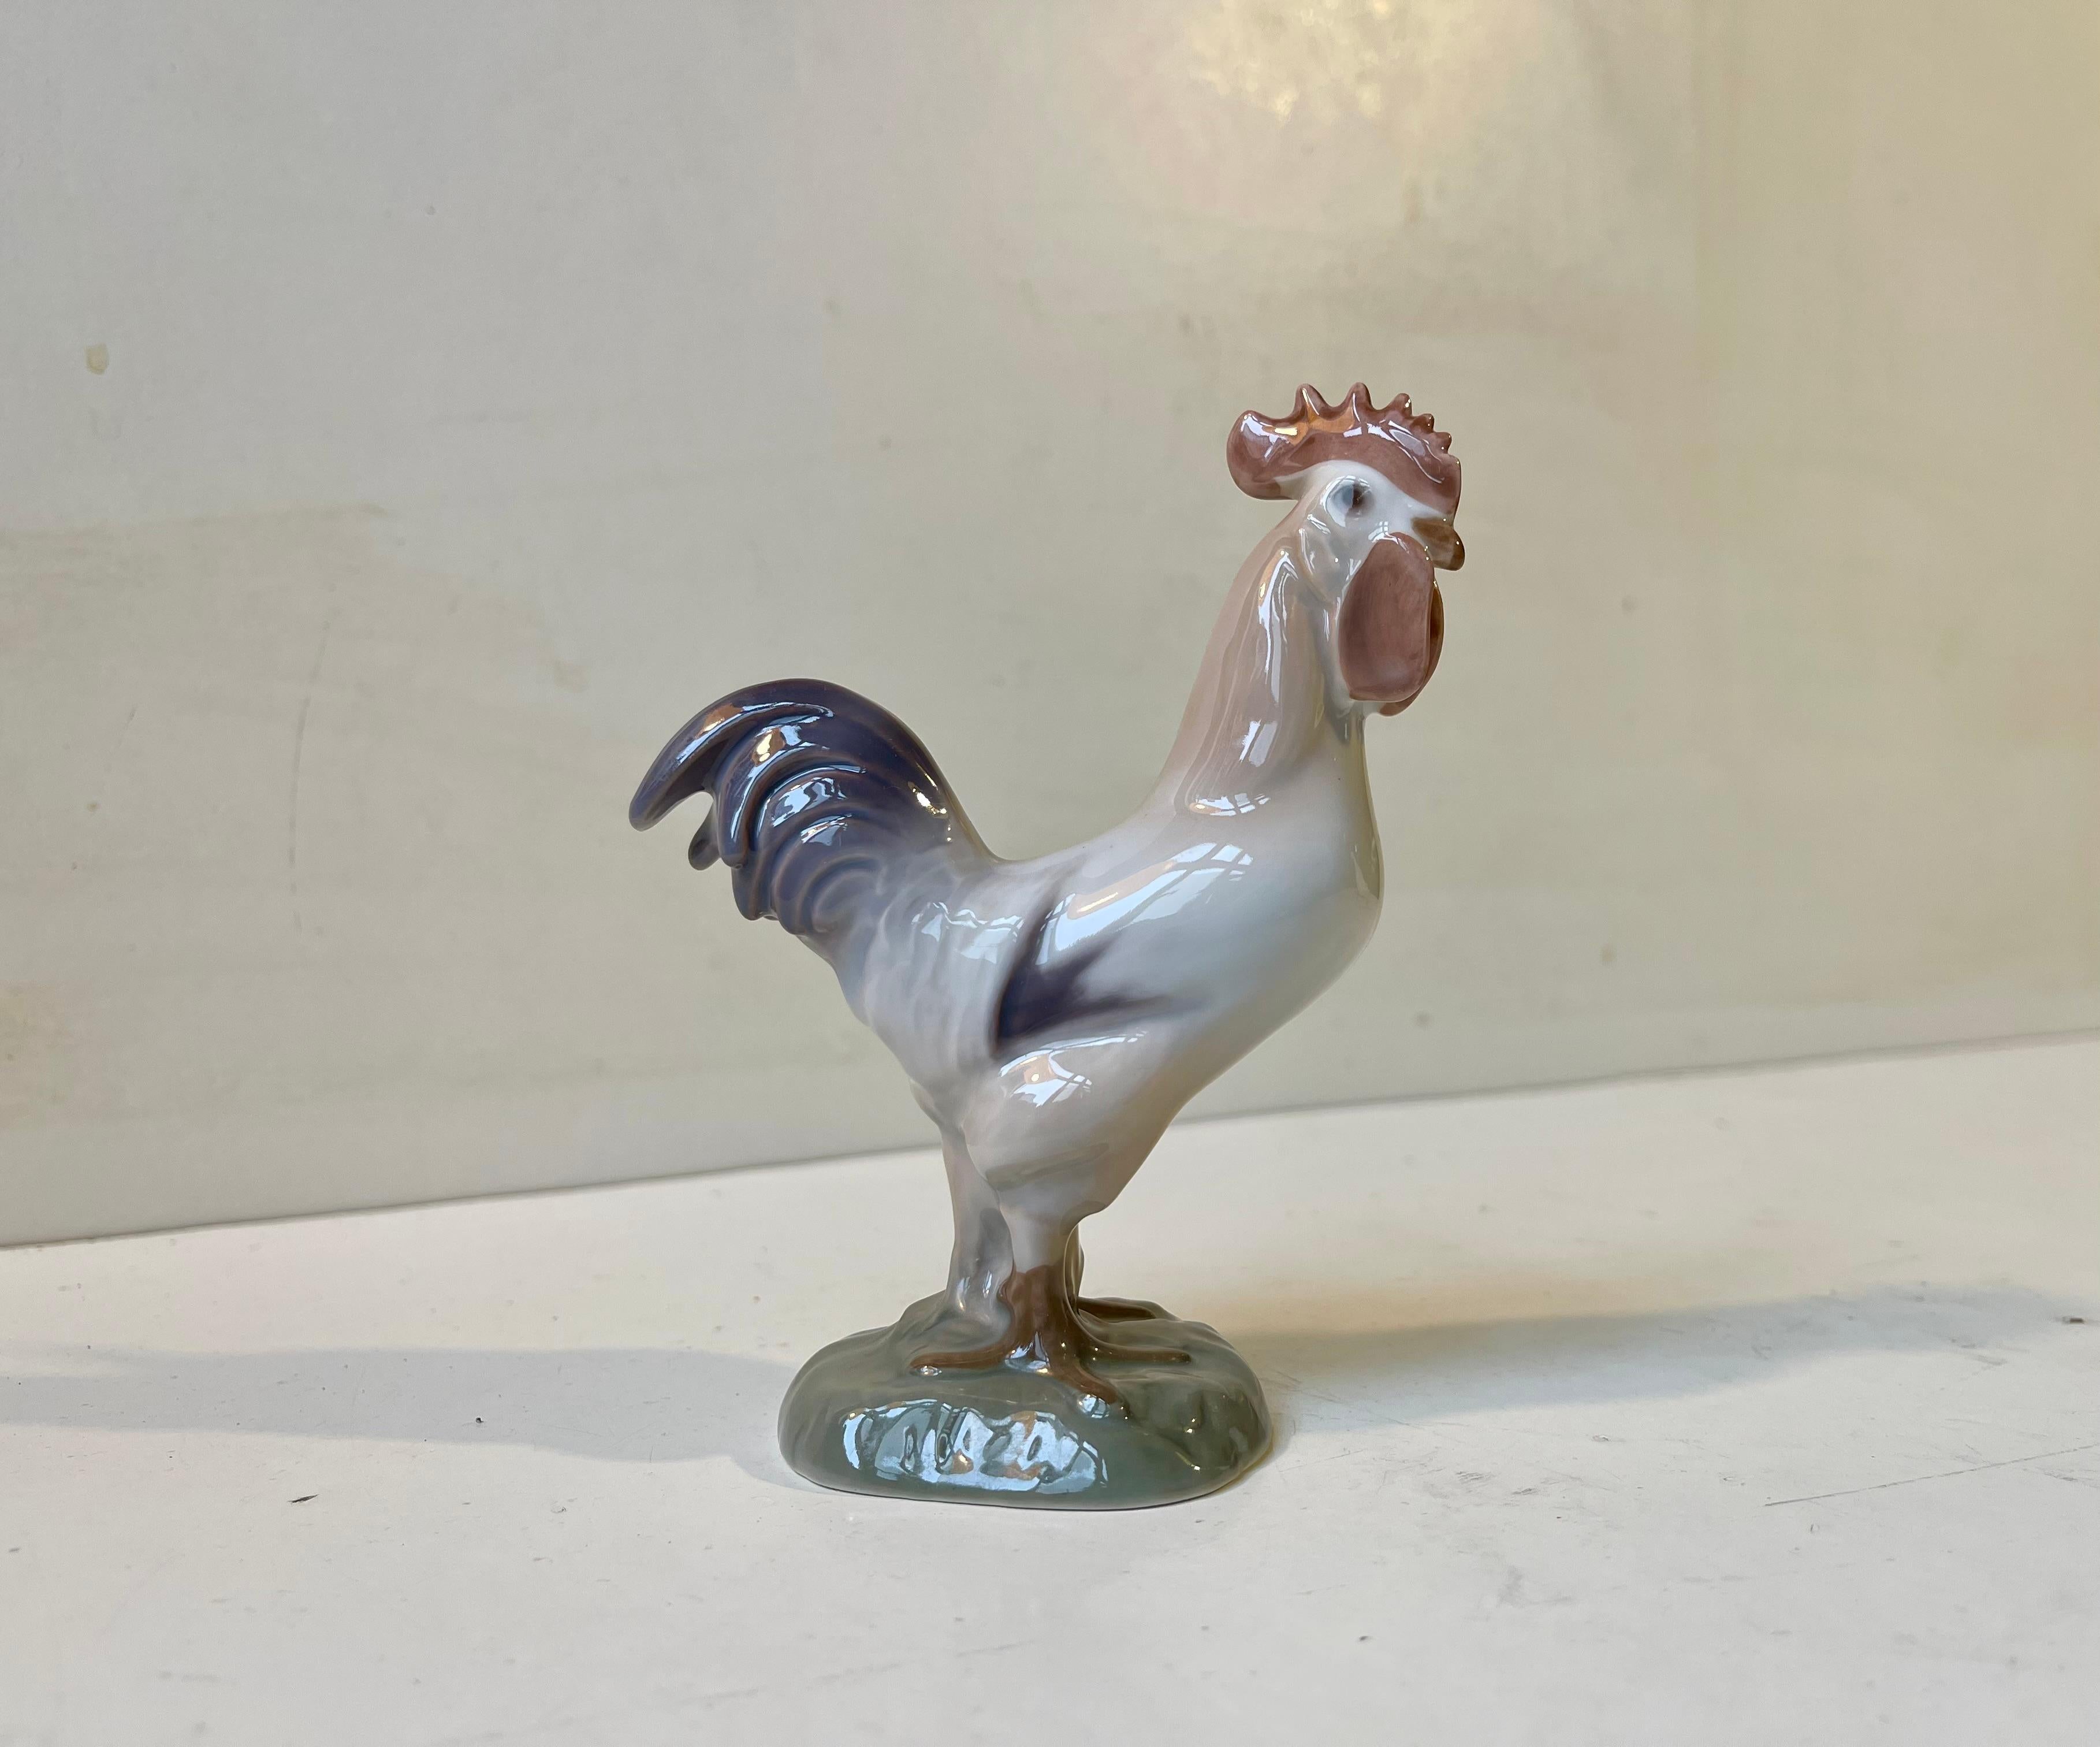 Naturalistically glazed rooster in porcelain by Bing & Grondahl in Denmark. Based upon a antique dessin this particular example was made circa 1970. Decoration number 2192. The condition is wellkept, clean and intact. Measurements: 12/9 cm.